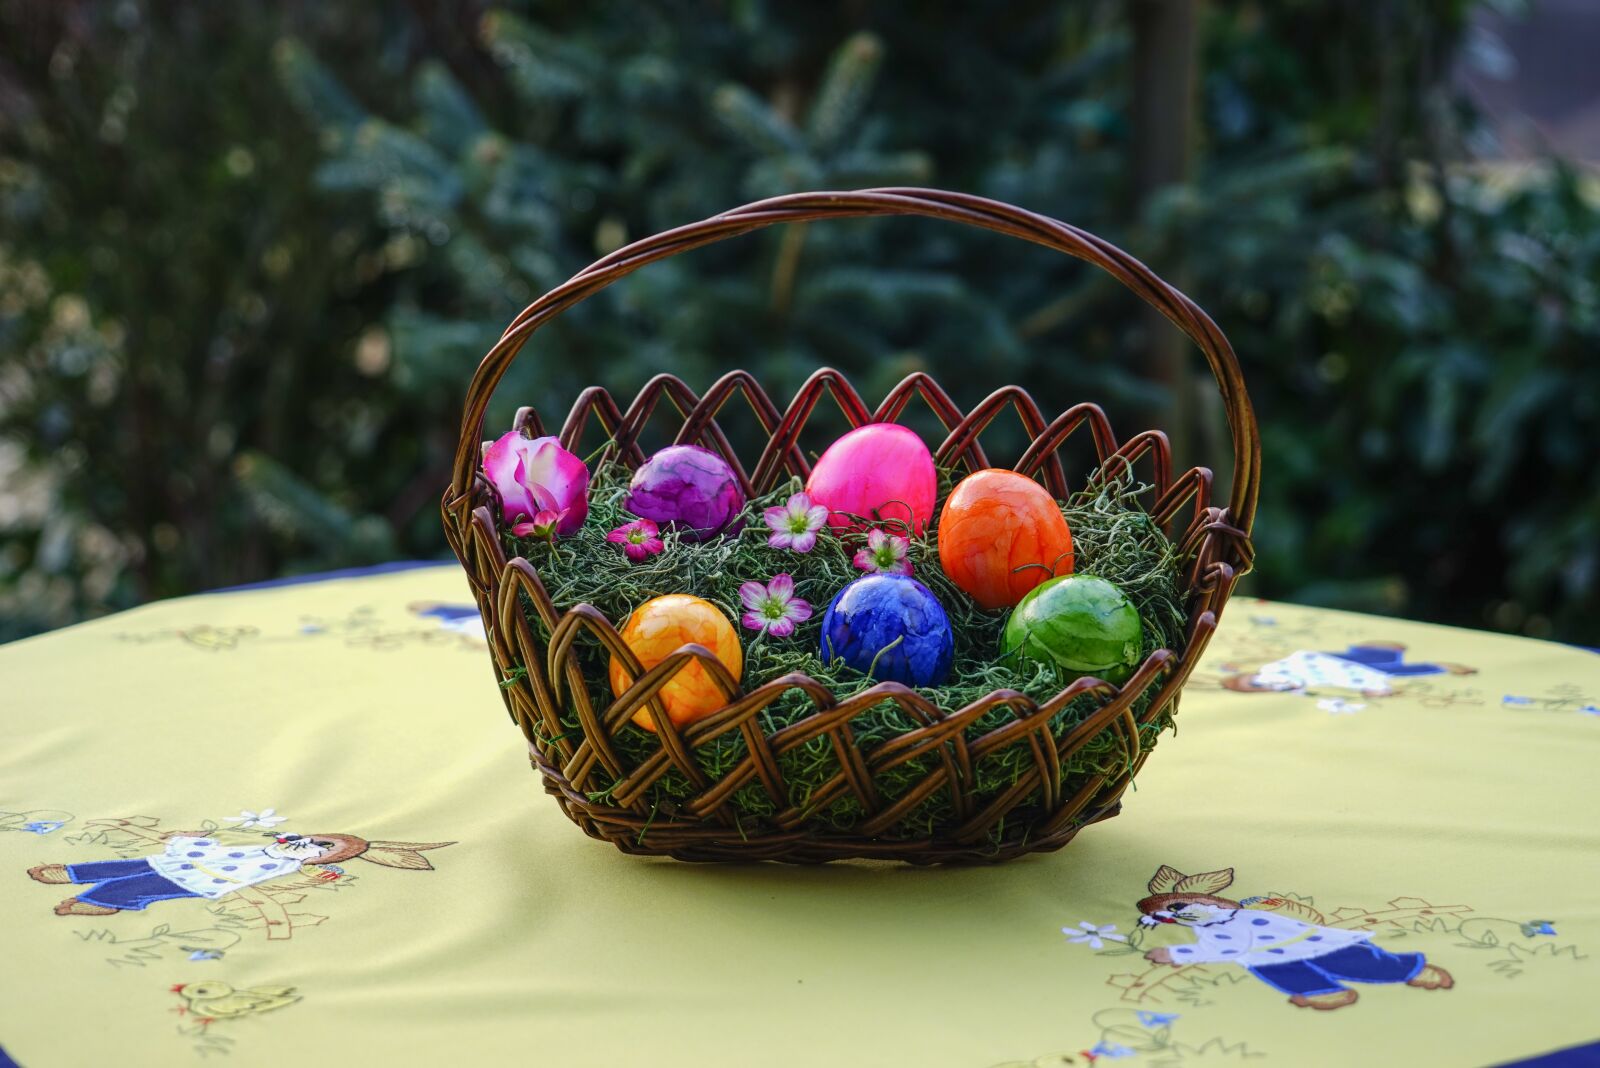 Sony a7R sample photo. Osterkorb, easter eggs, colorful photography